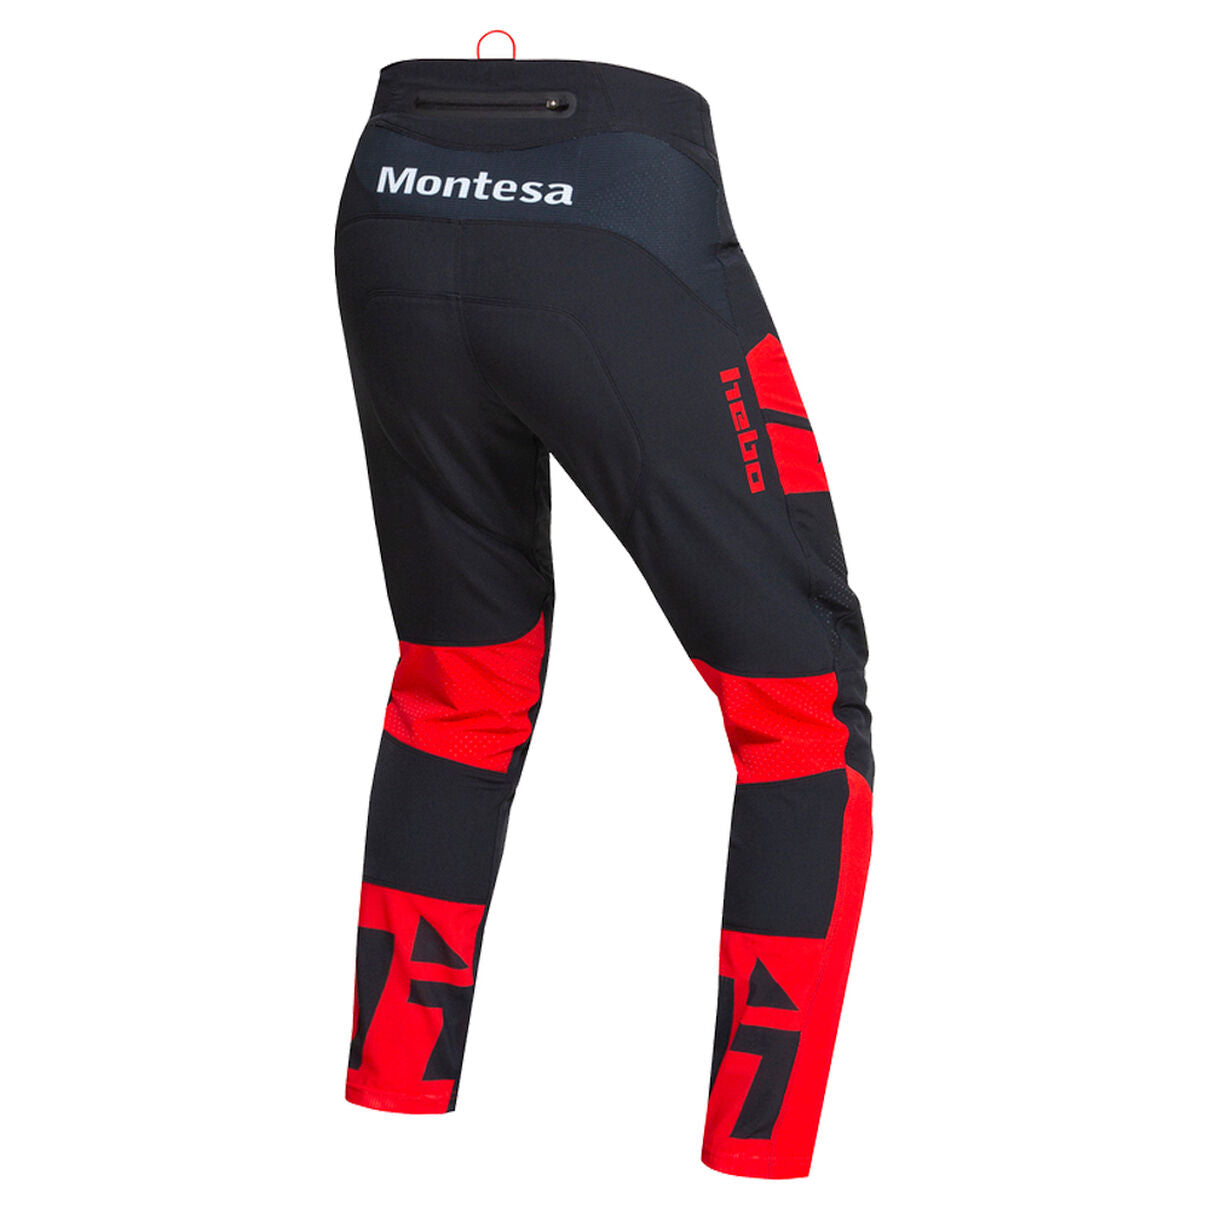 Hebo Trials Pant Montesa Classic Tech Red